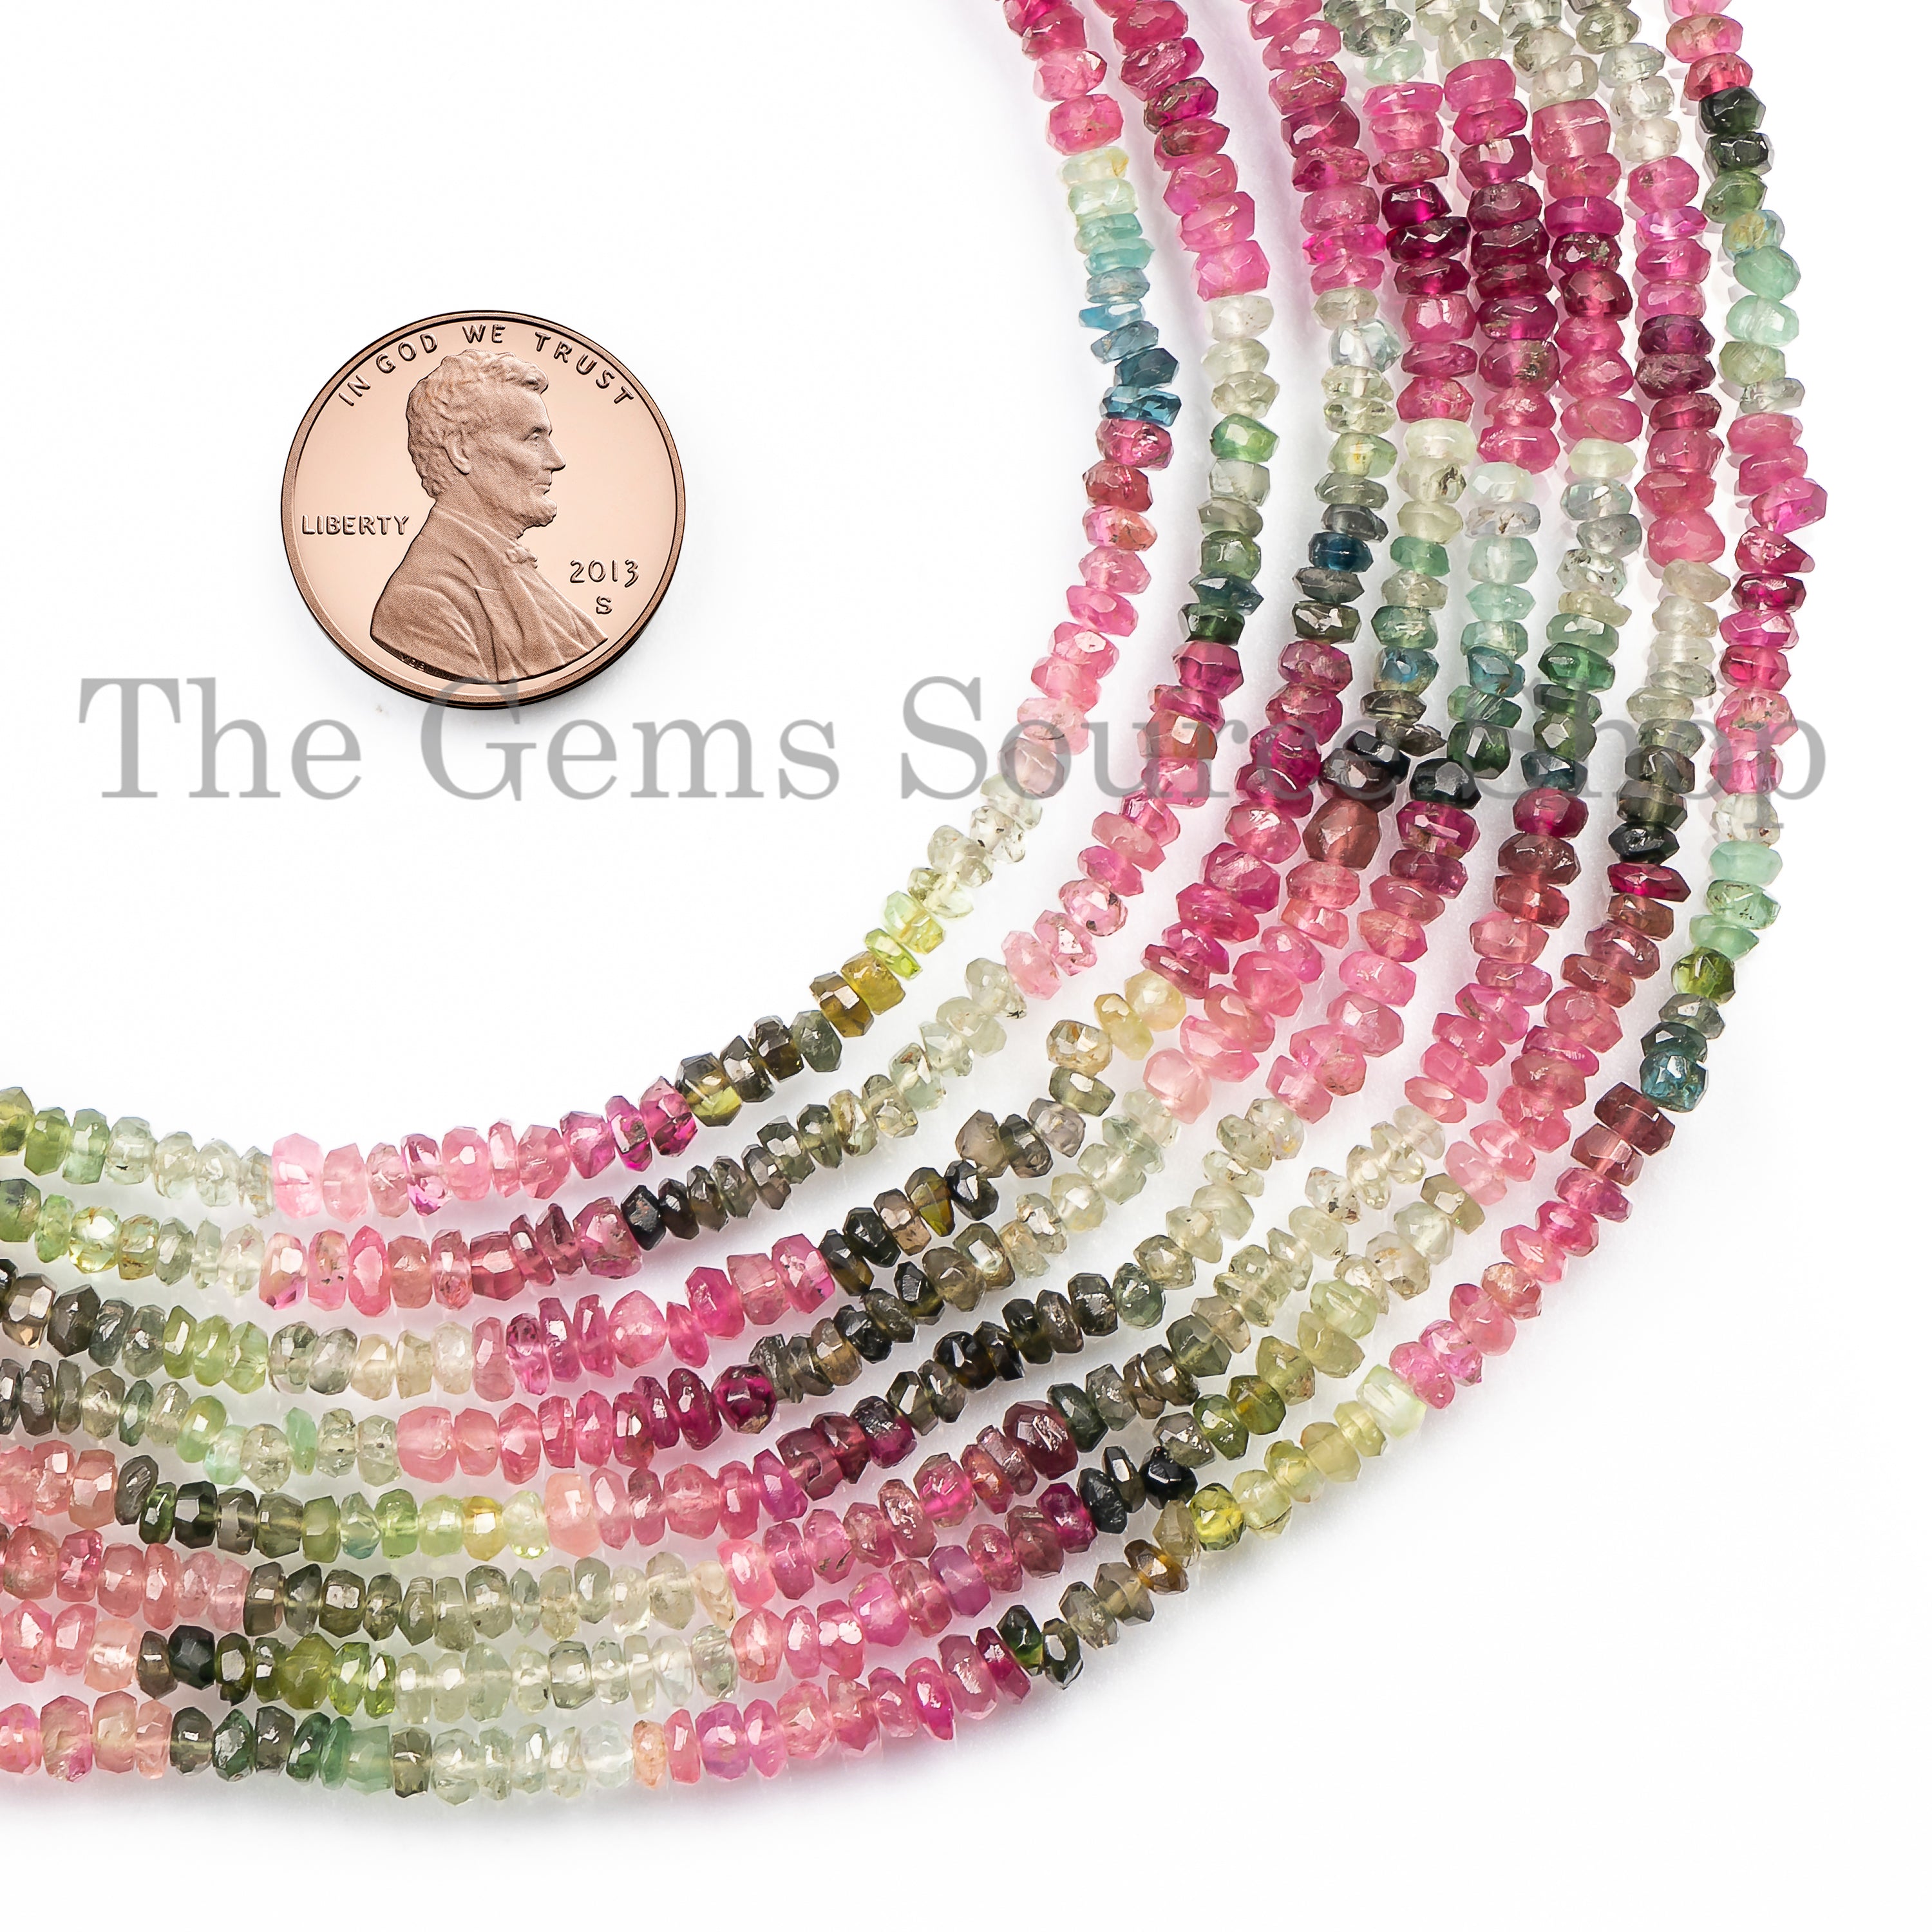 Wholesale Lot Of 3.5mm Multi Tourmaline Beads, Multi Tourmaline Faceted Beads, Tourmaline Rondelle Shape Beads, Gemstone Beads For Necklace